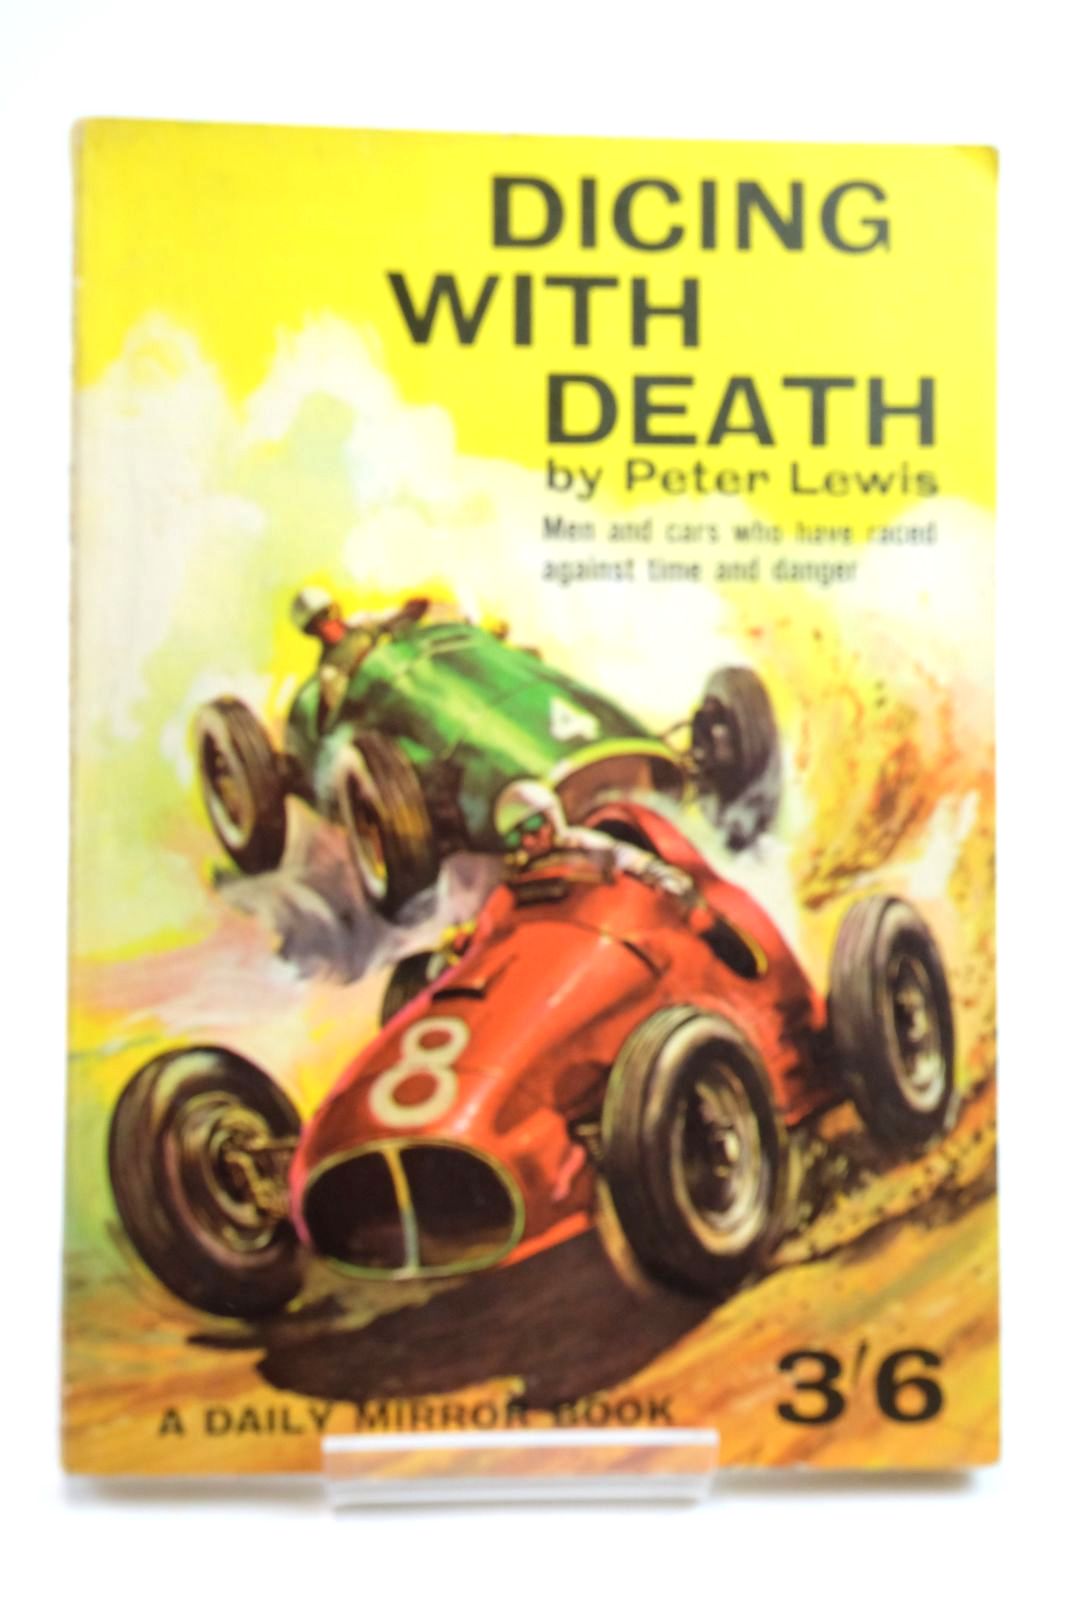 Photo of DICING WITH DEATH written by Lewis, Peter illustrated by Steward, Glen published by Daily Mirror Books (STOCK CODE: 2134625)  for sale by Stella & Rose's Books